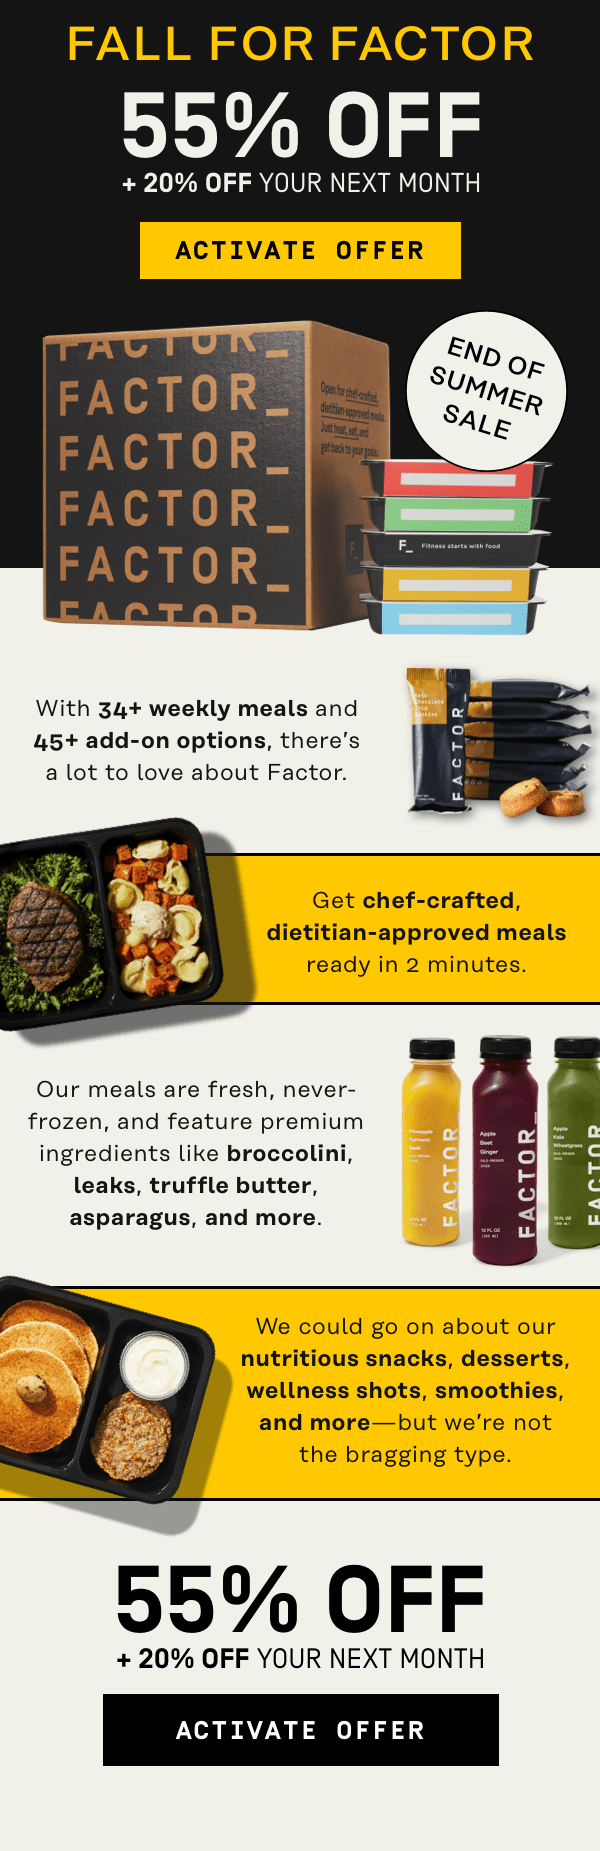 Fall for Factor - End of Summer Sale! 55% Off + 20% Off your next month | Activate Offer Clean eats: anywhere, anytime